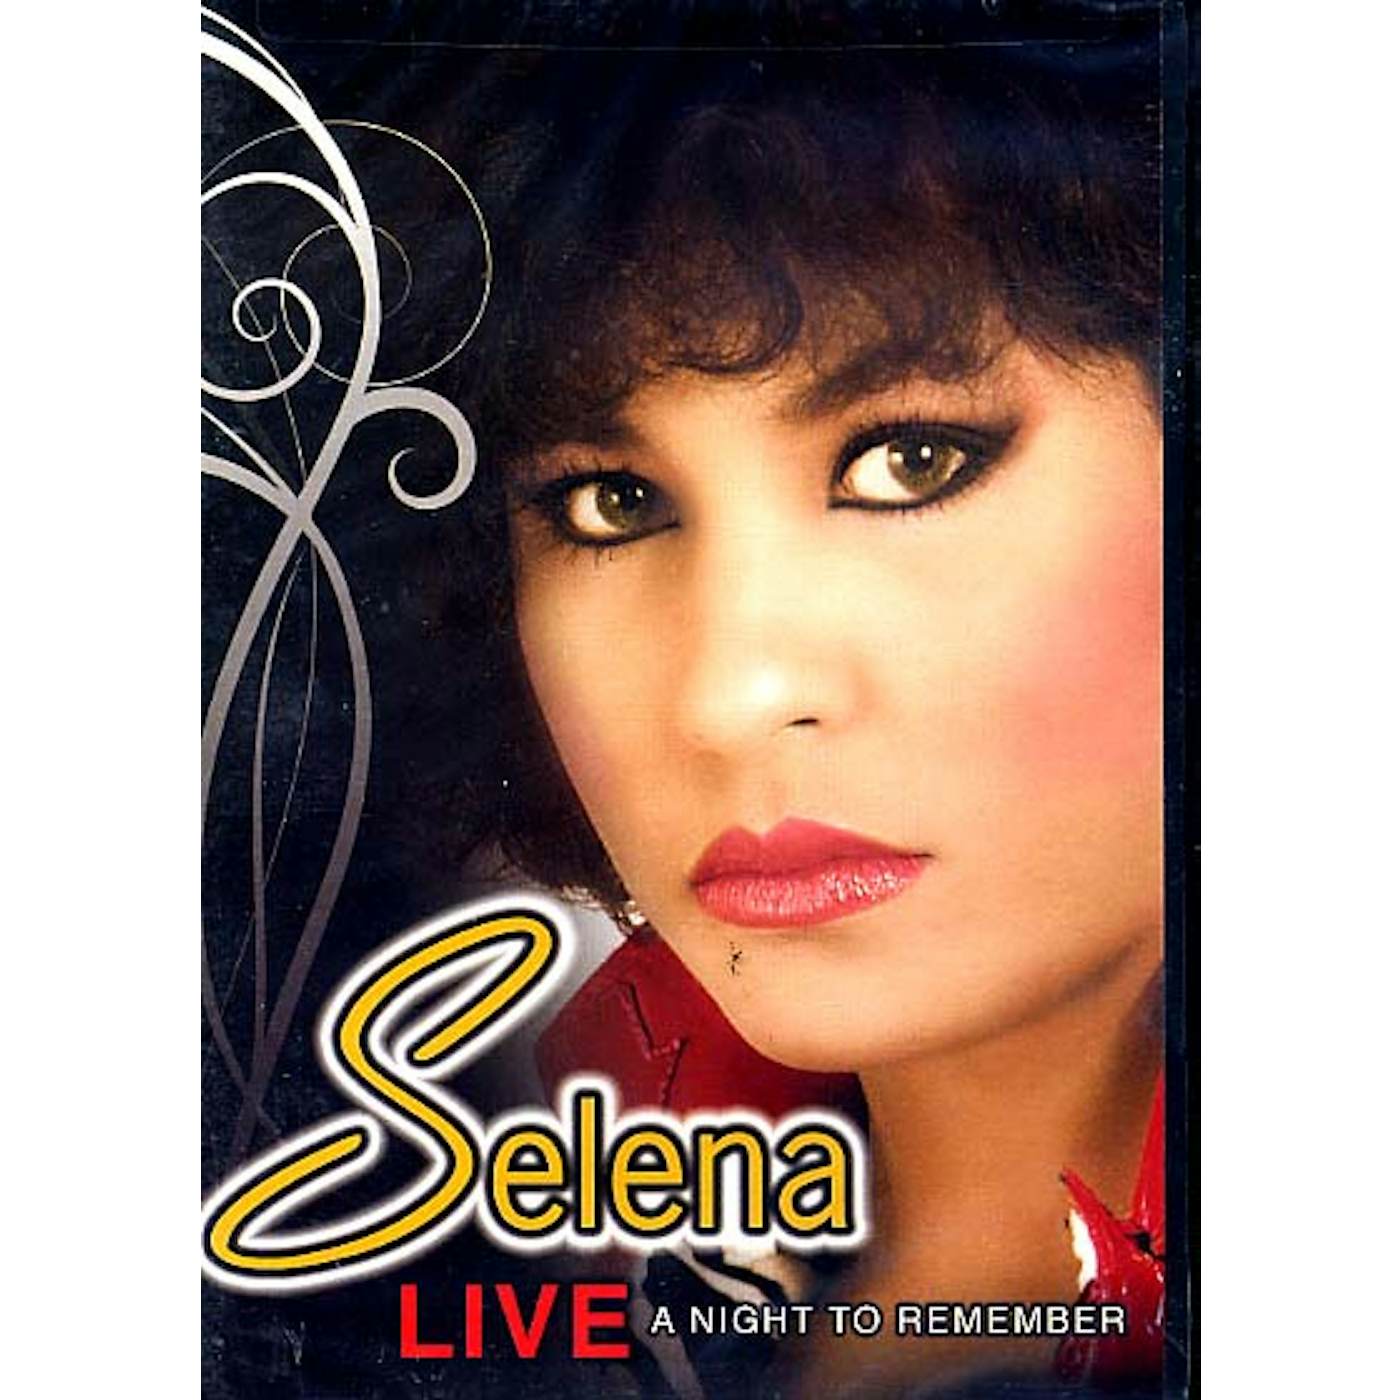 Selena LIVE - A NIGHT TO REMEMBER DVD